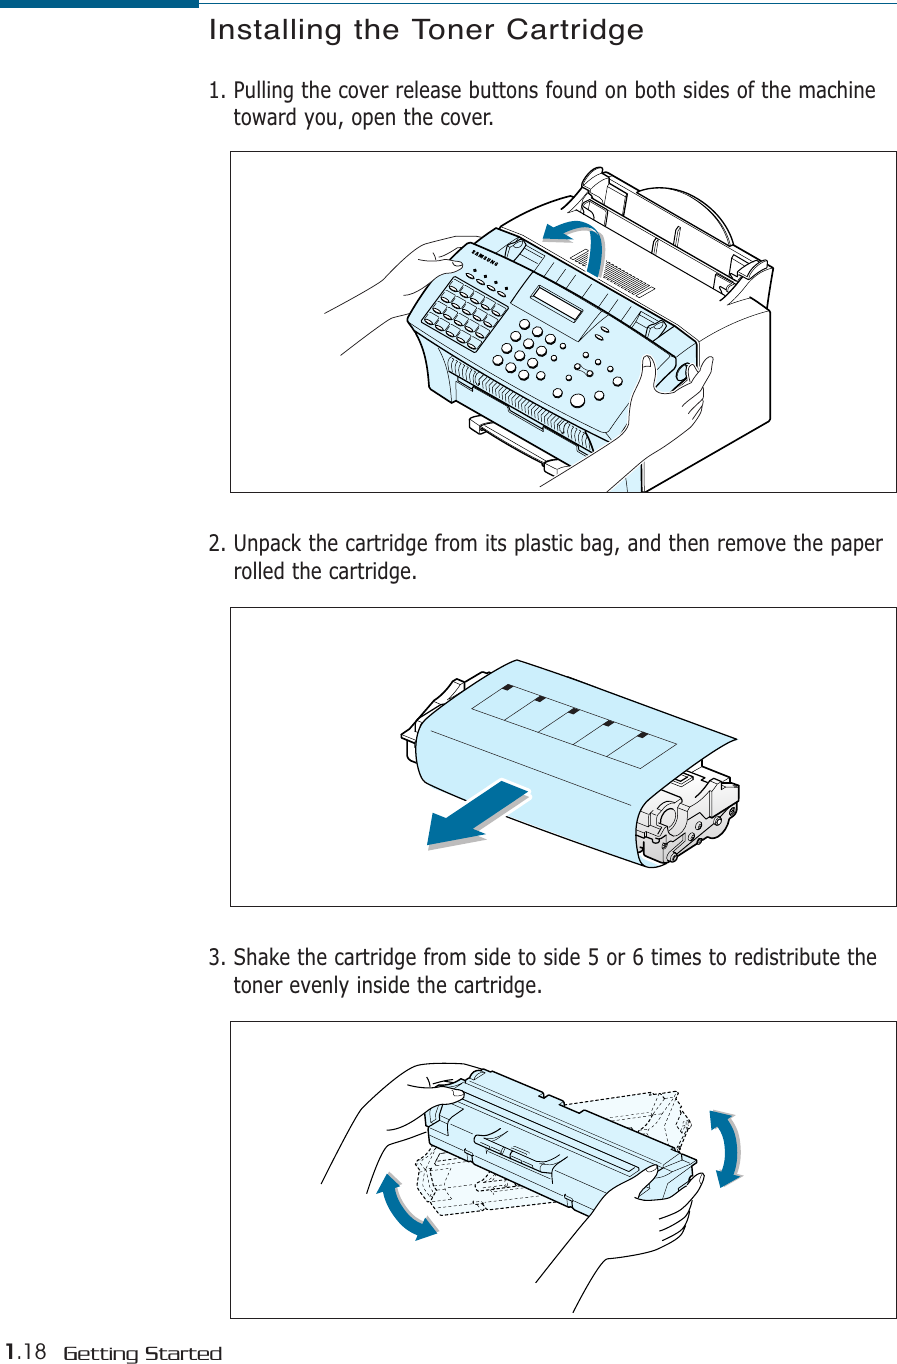 1.18 Getting StartedInstalling the Toner Cartridge1. Pulling the cover release buttons found on both sides of the machinetoward you, open the cover.2. Unpack the cartridge from its plastic bag, and then remove the paperrolled the cartridge. 3. Shake the cartridge from side to side 5 or 6 times to redistribute thetoner evenly inside the cartridge.